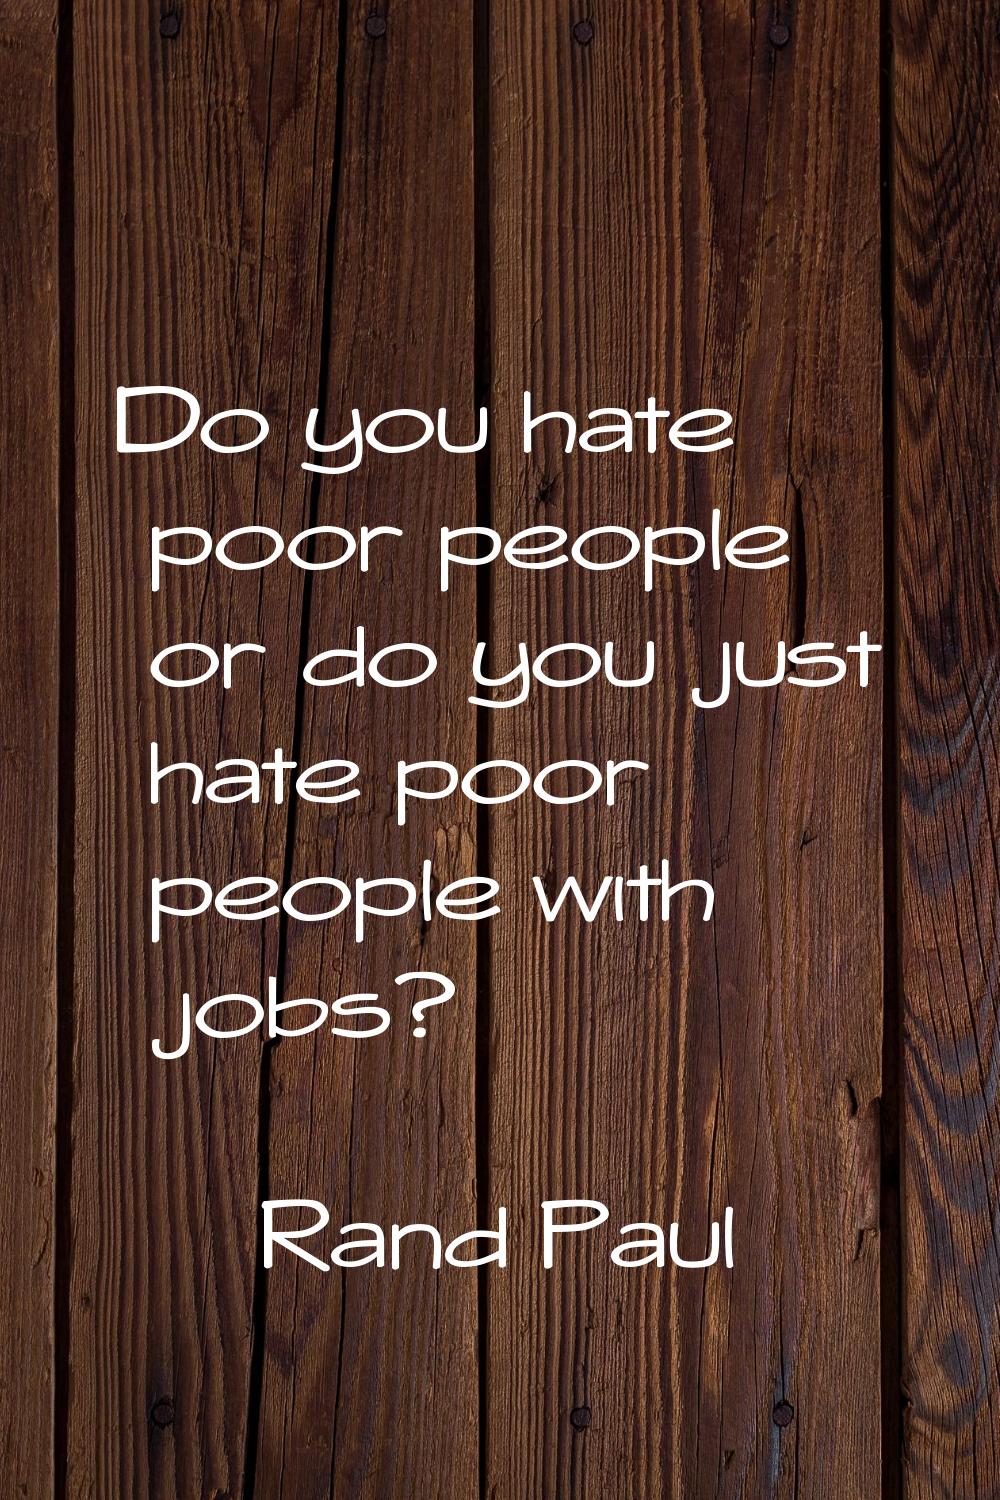 Do you hate poor people or do you just hate poor people with jobs?